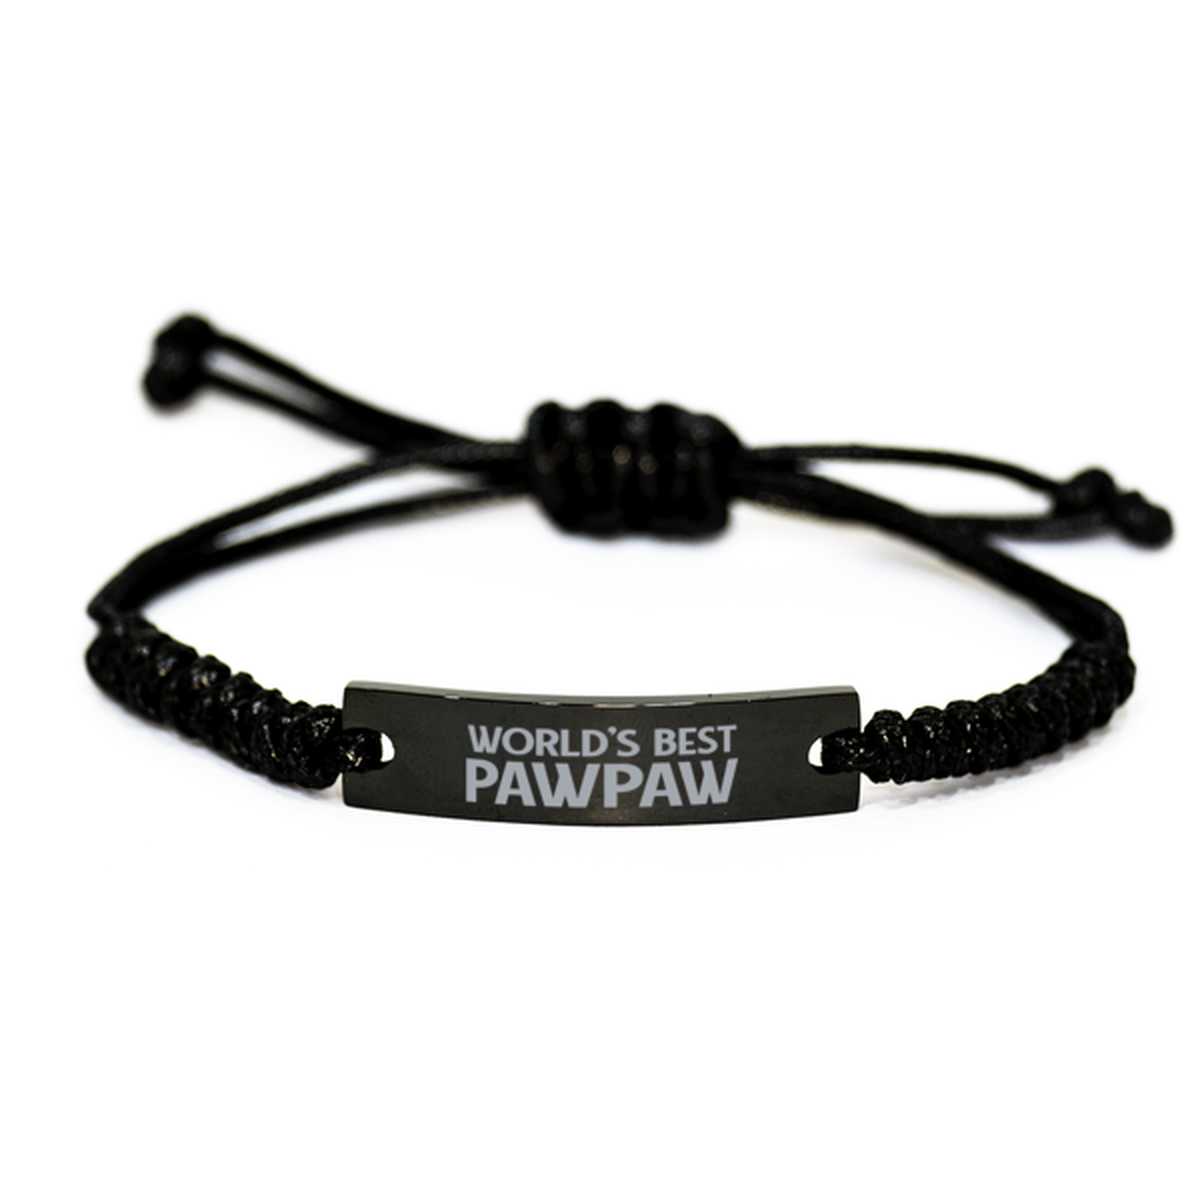 World's Best Pawpaw Gifts, Funny Engraved Rope Bracelet For Pawpaw, Birthday Family Gifts For Men